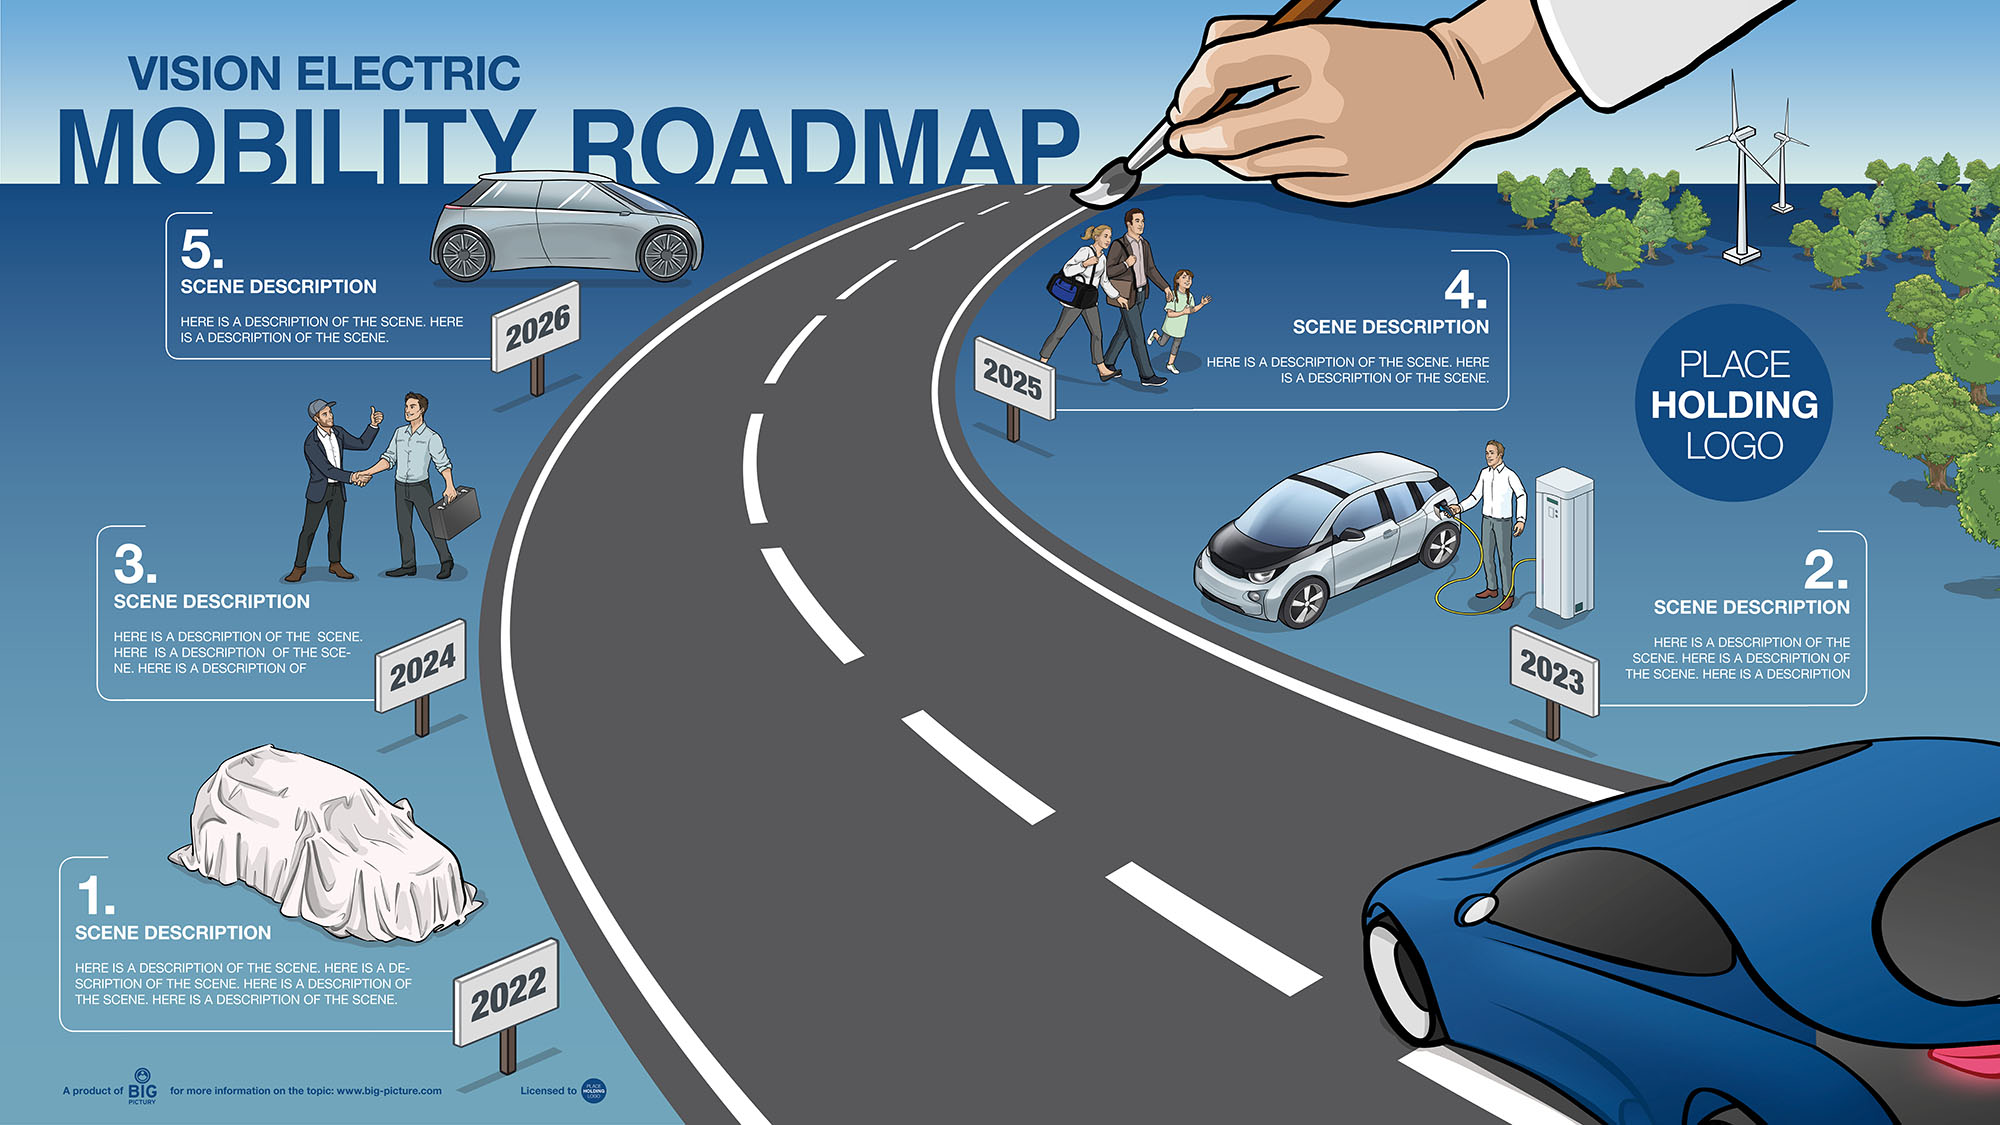 Chihuahua begins implementation of e-mobility roadmap